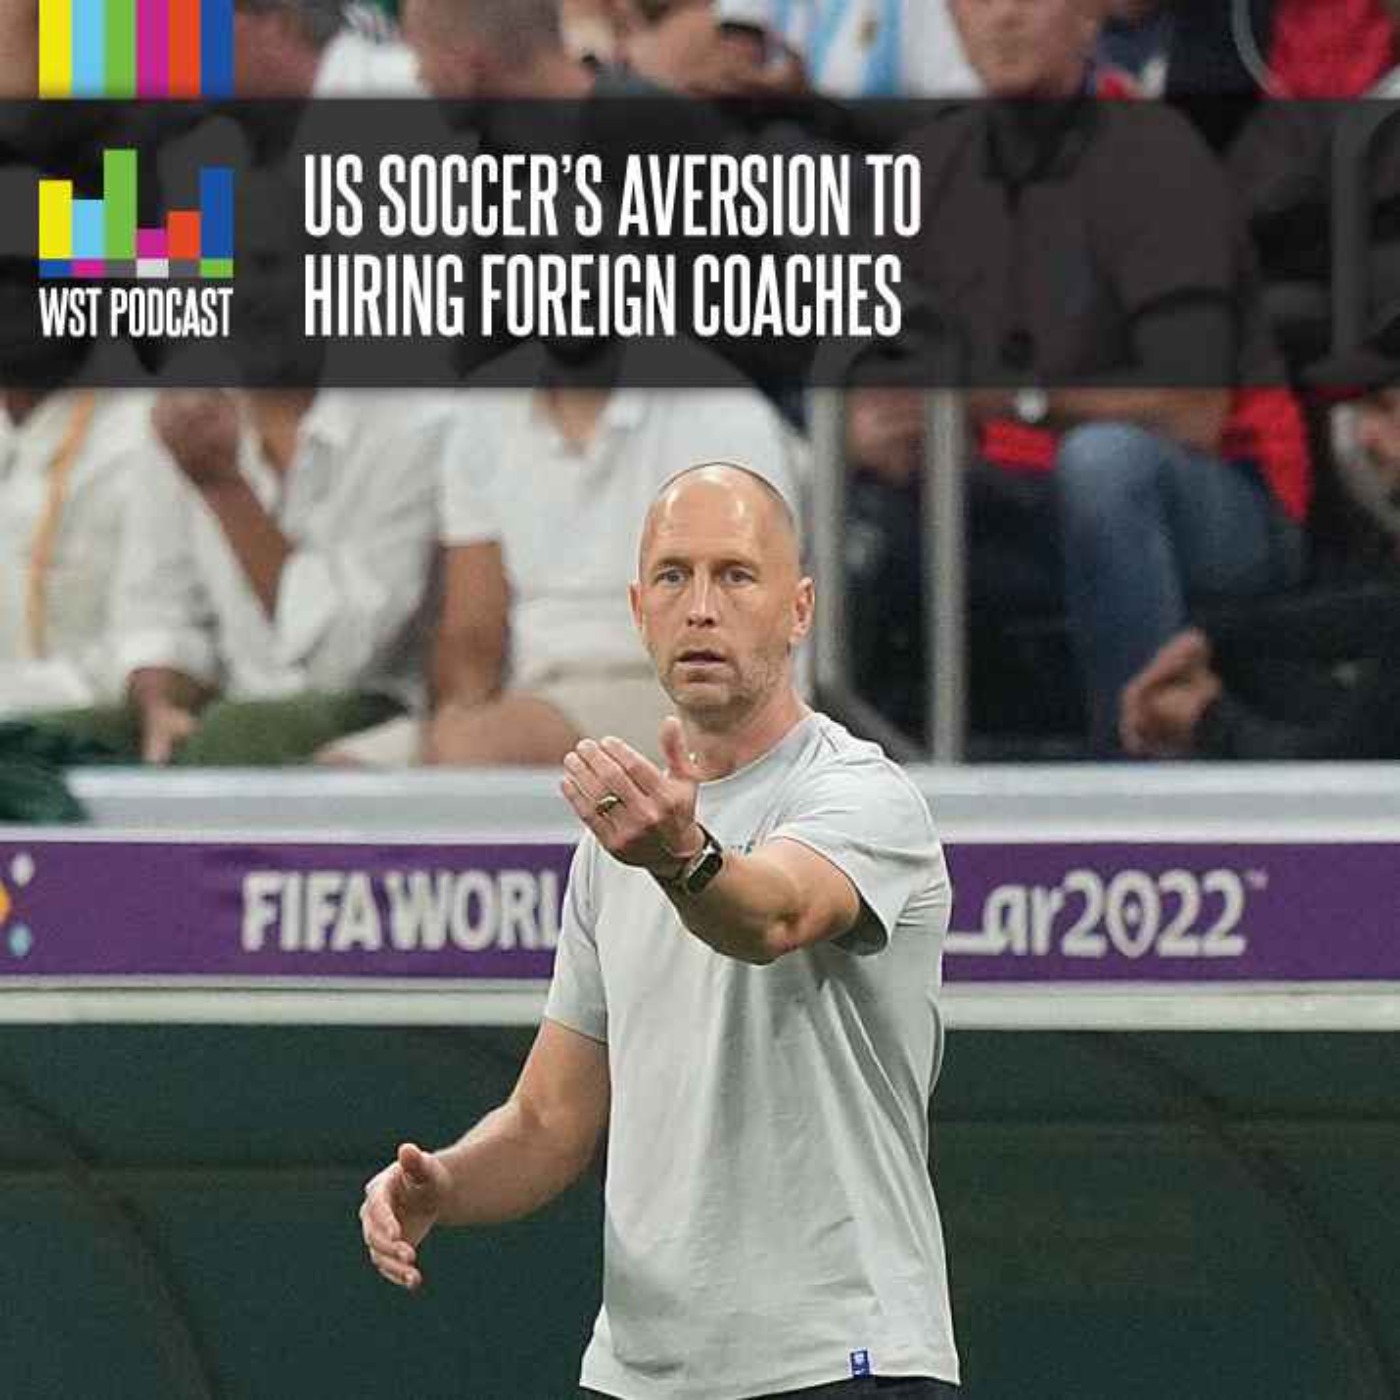 US Soccer's aversion to hiring foreign coaches